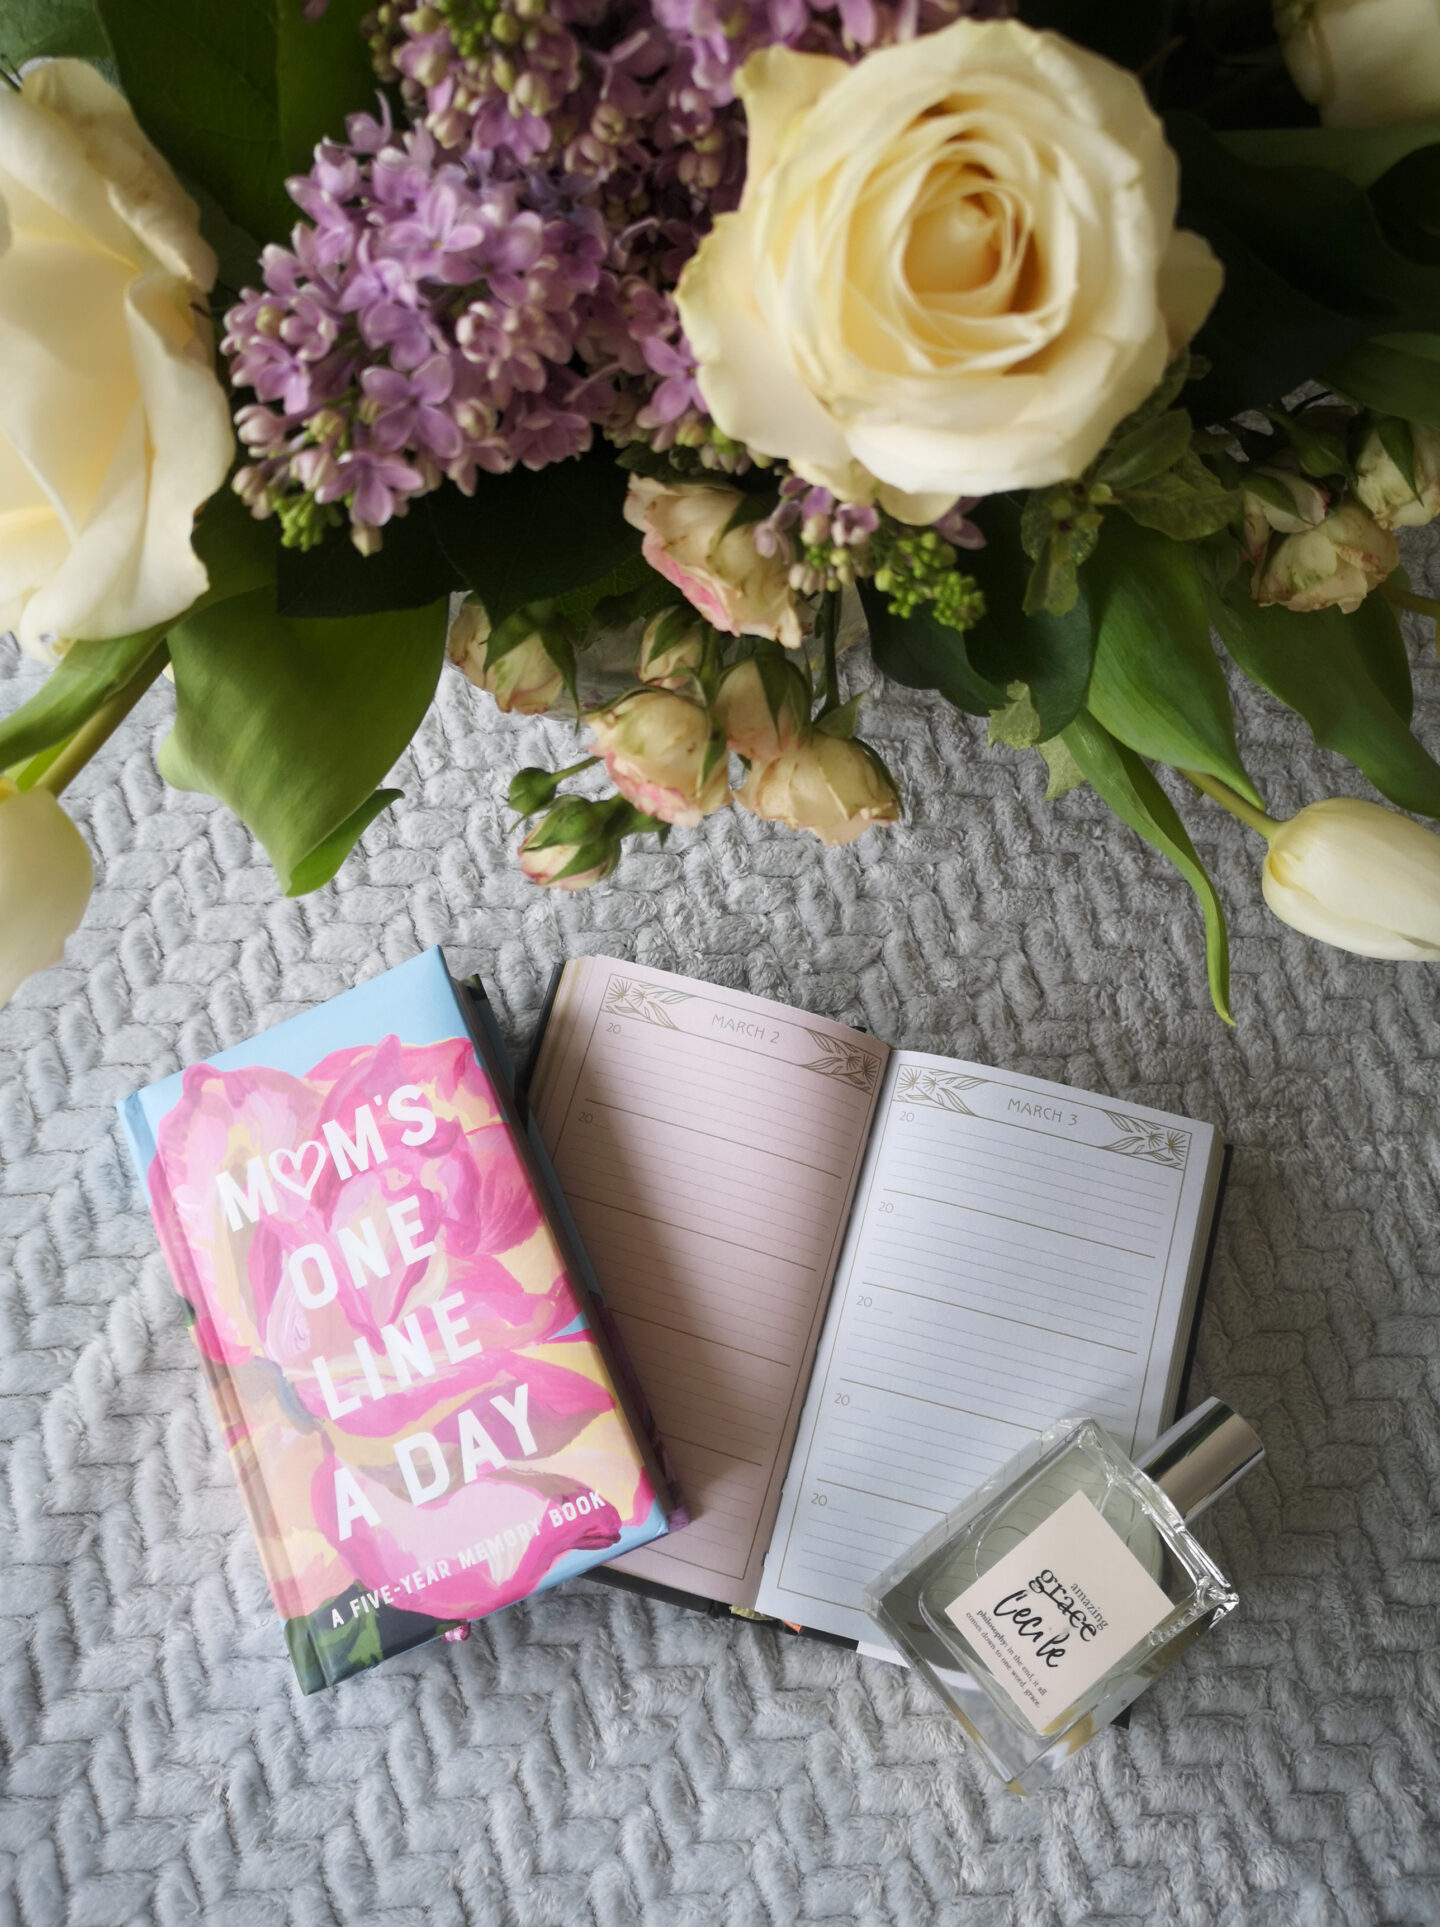 One Line A Day Books, Gift Book, Abrams and Chronicle Books, Mother's Day Edition, Mother's Day Giveaway, Win, the Frenchie Mummy, Competition, Mom's One Line A Day, Journaling, Journal, Journaling Book, Diary